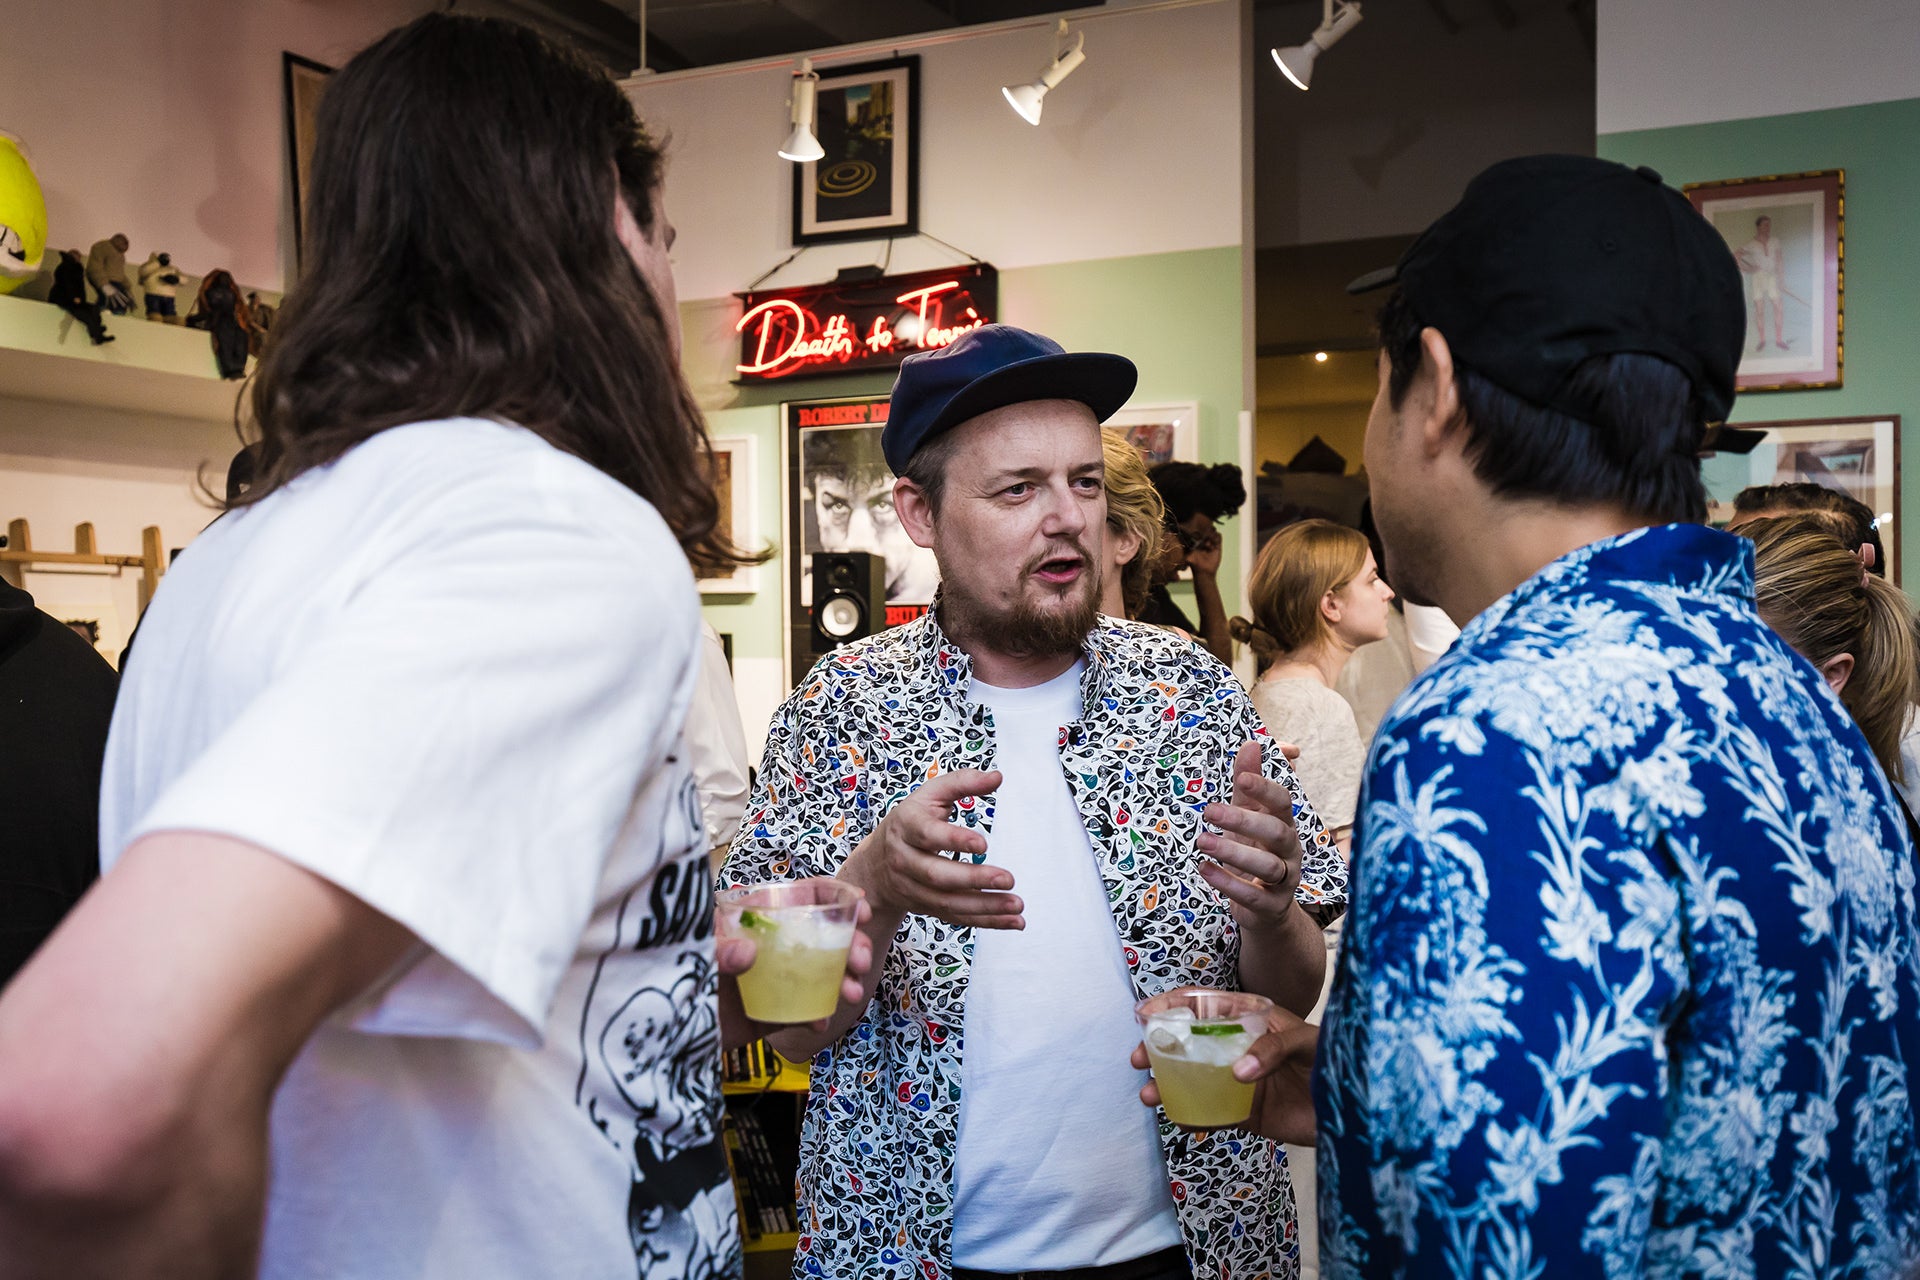 Rowing Blazers Welcomes Death To Tennis (Photos from the party at 161 Grand St. NYC)